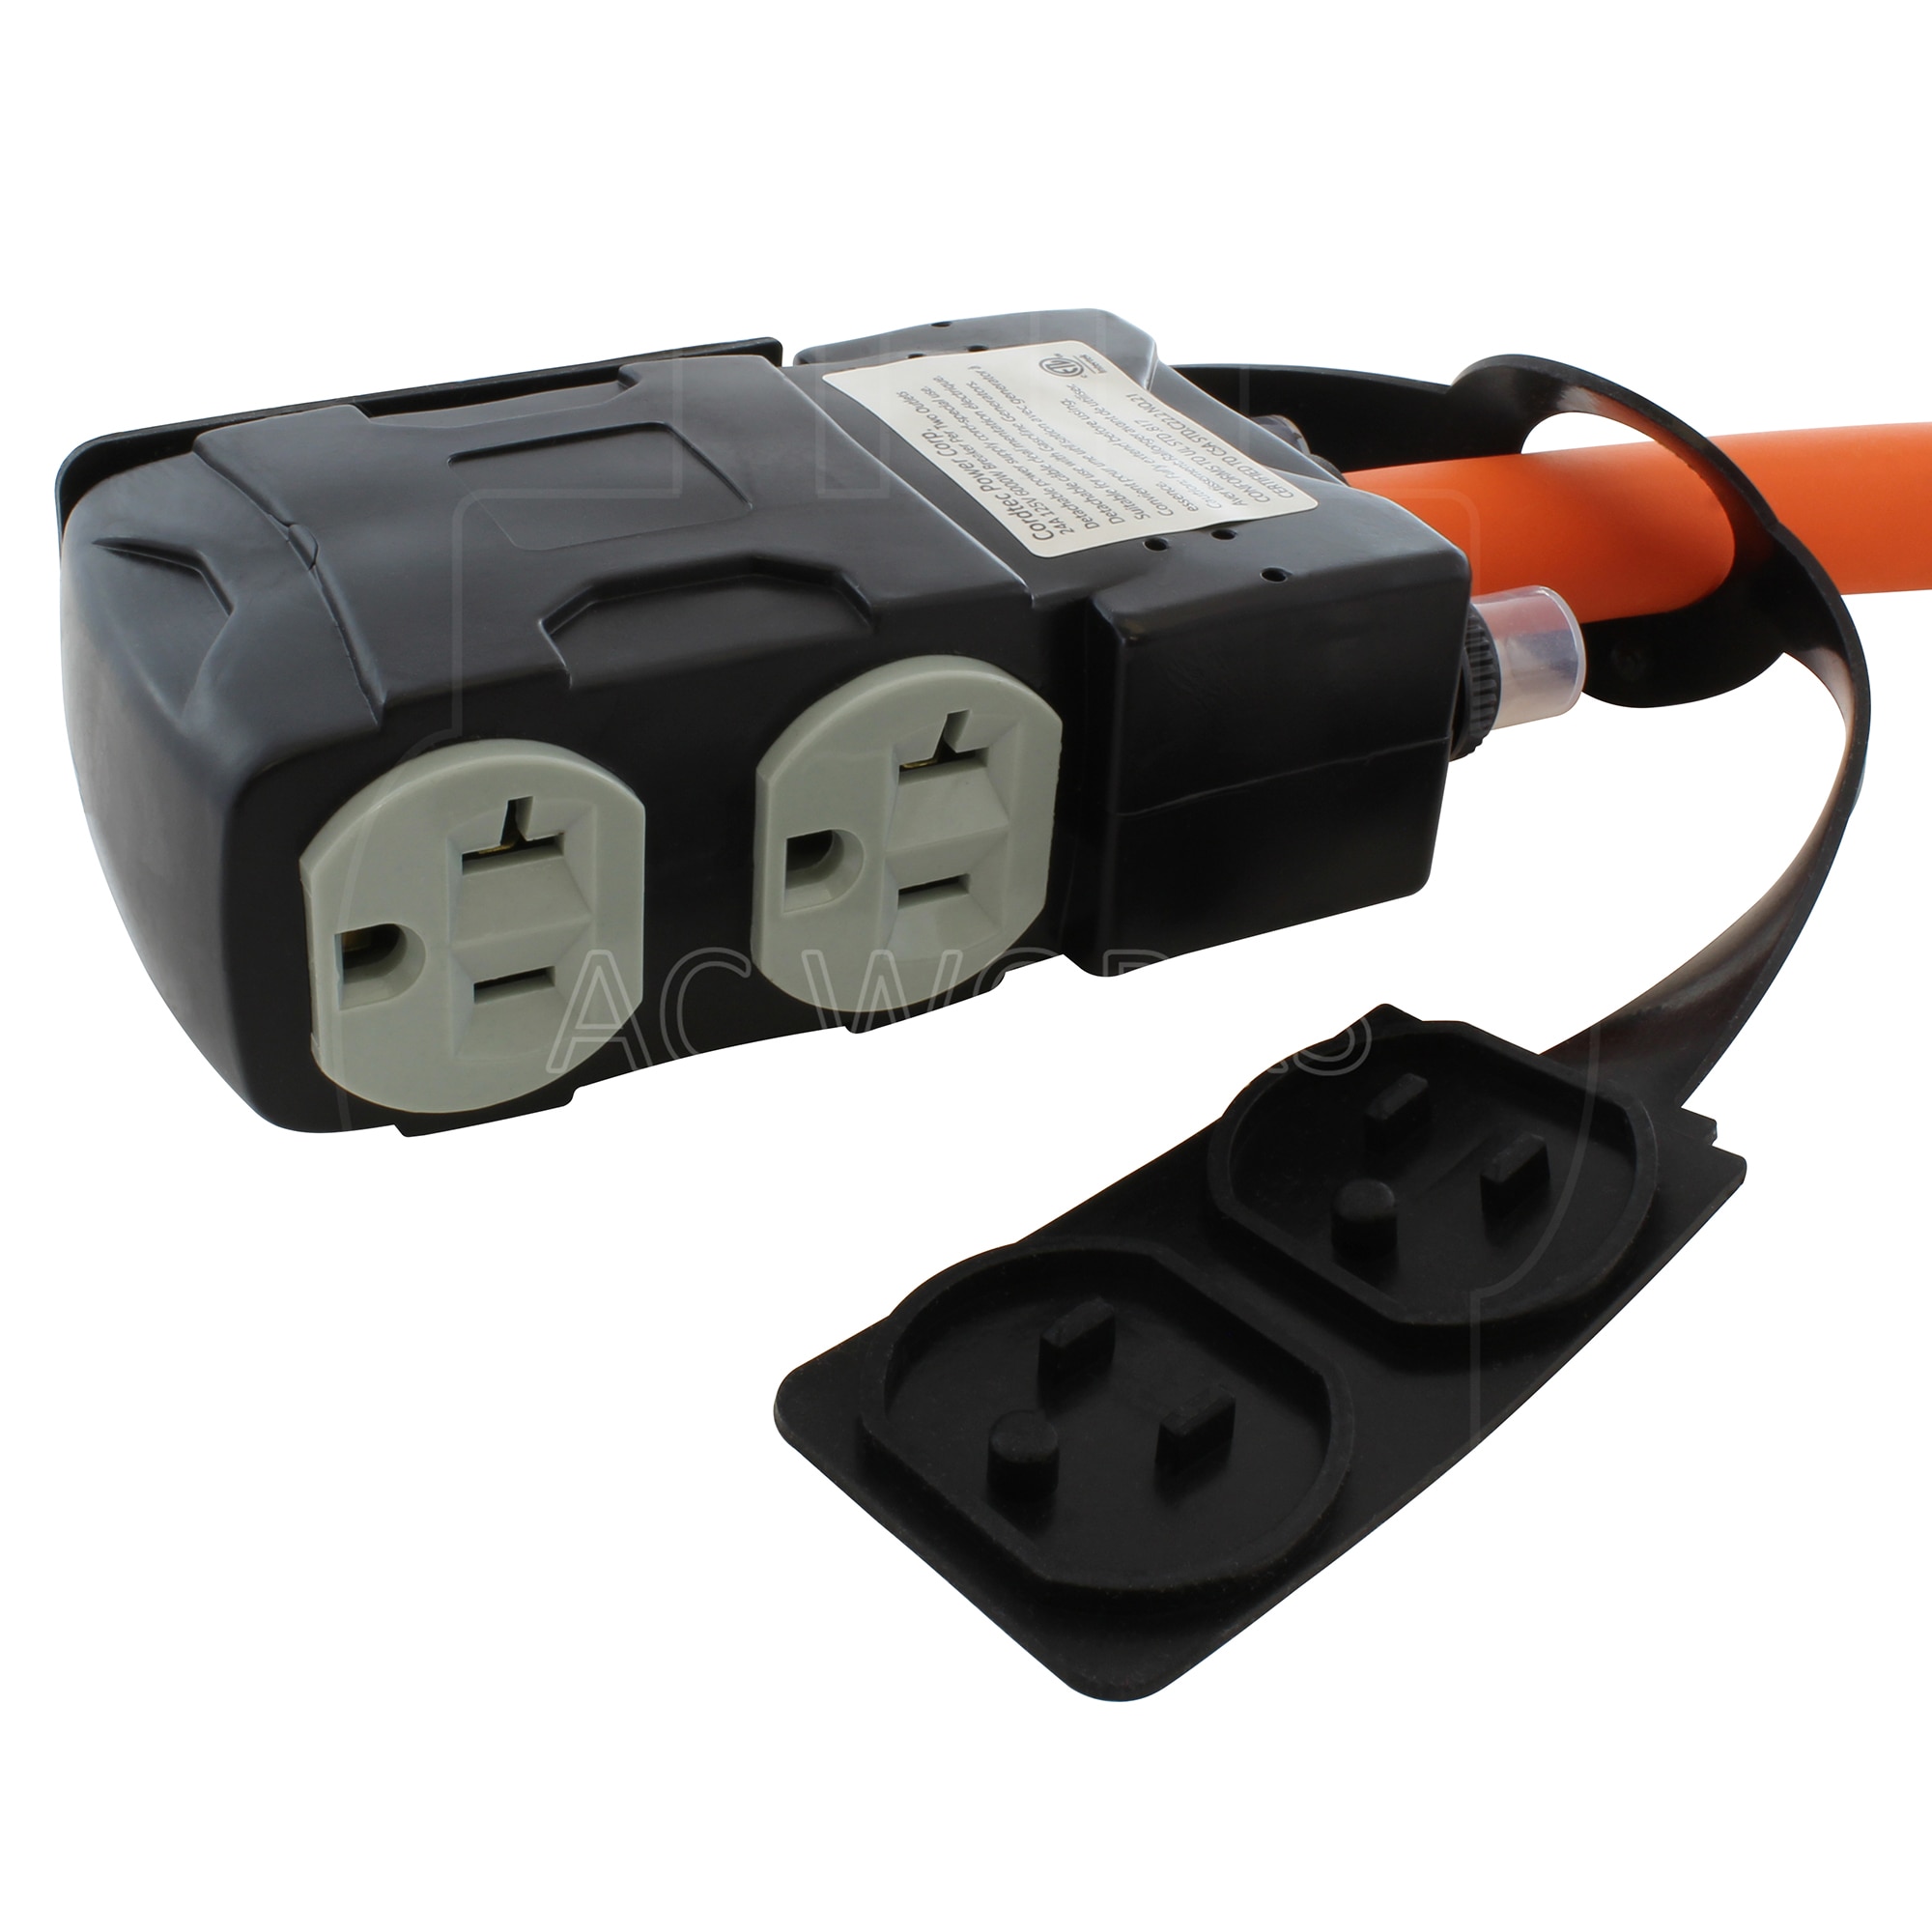 AC WORKS - Outlet Adapters & Converters - Electrical Cords - The Home Depot